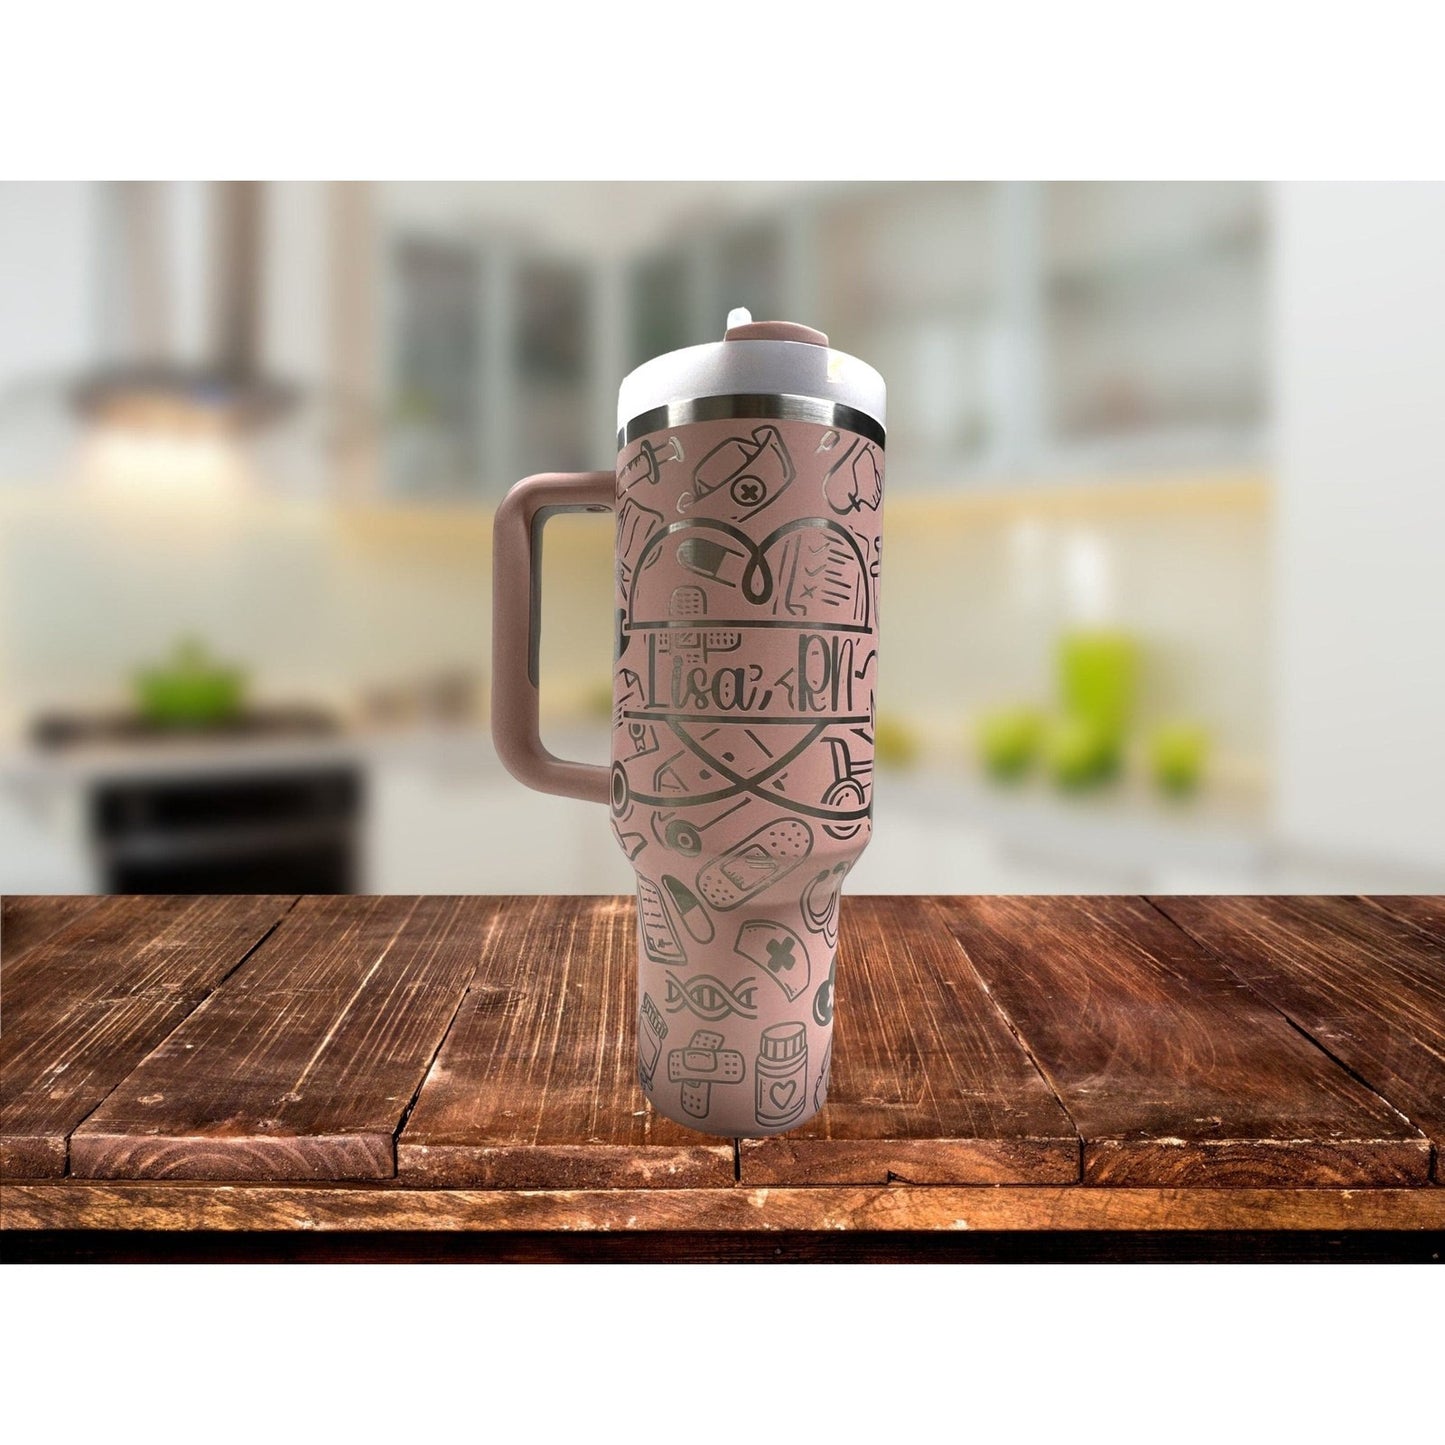 Stanley 40 oz Quencher 2.0 tumbler with CITRON handle